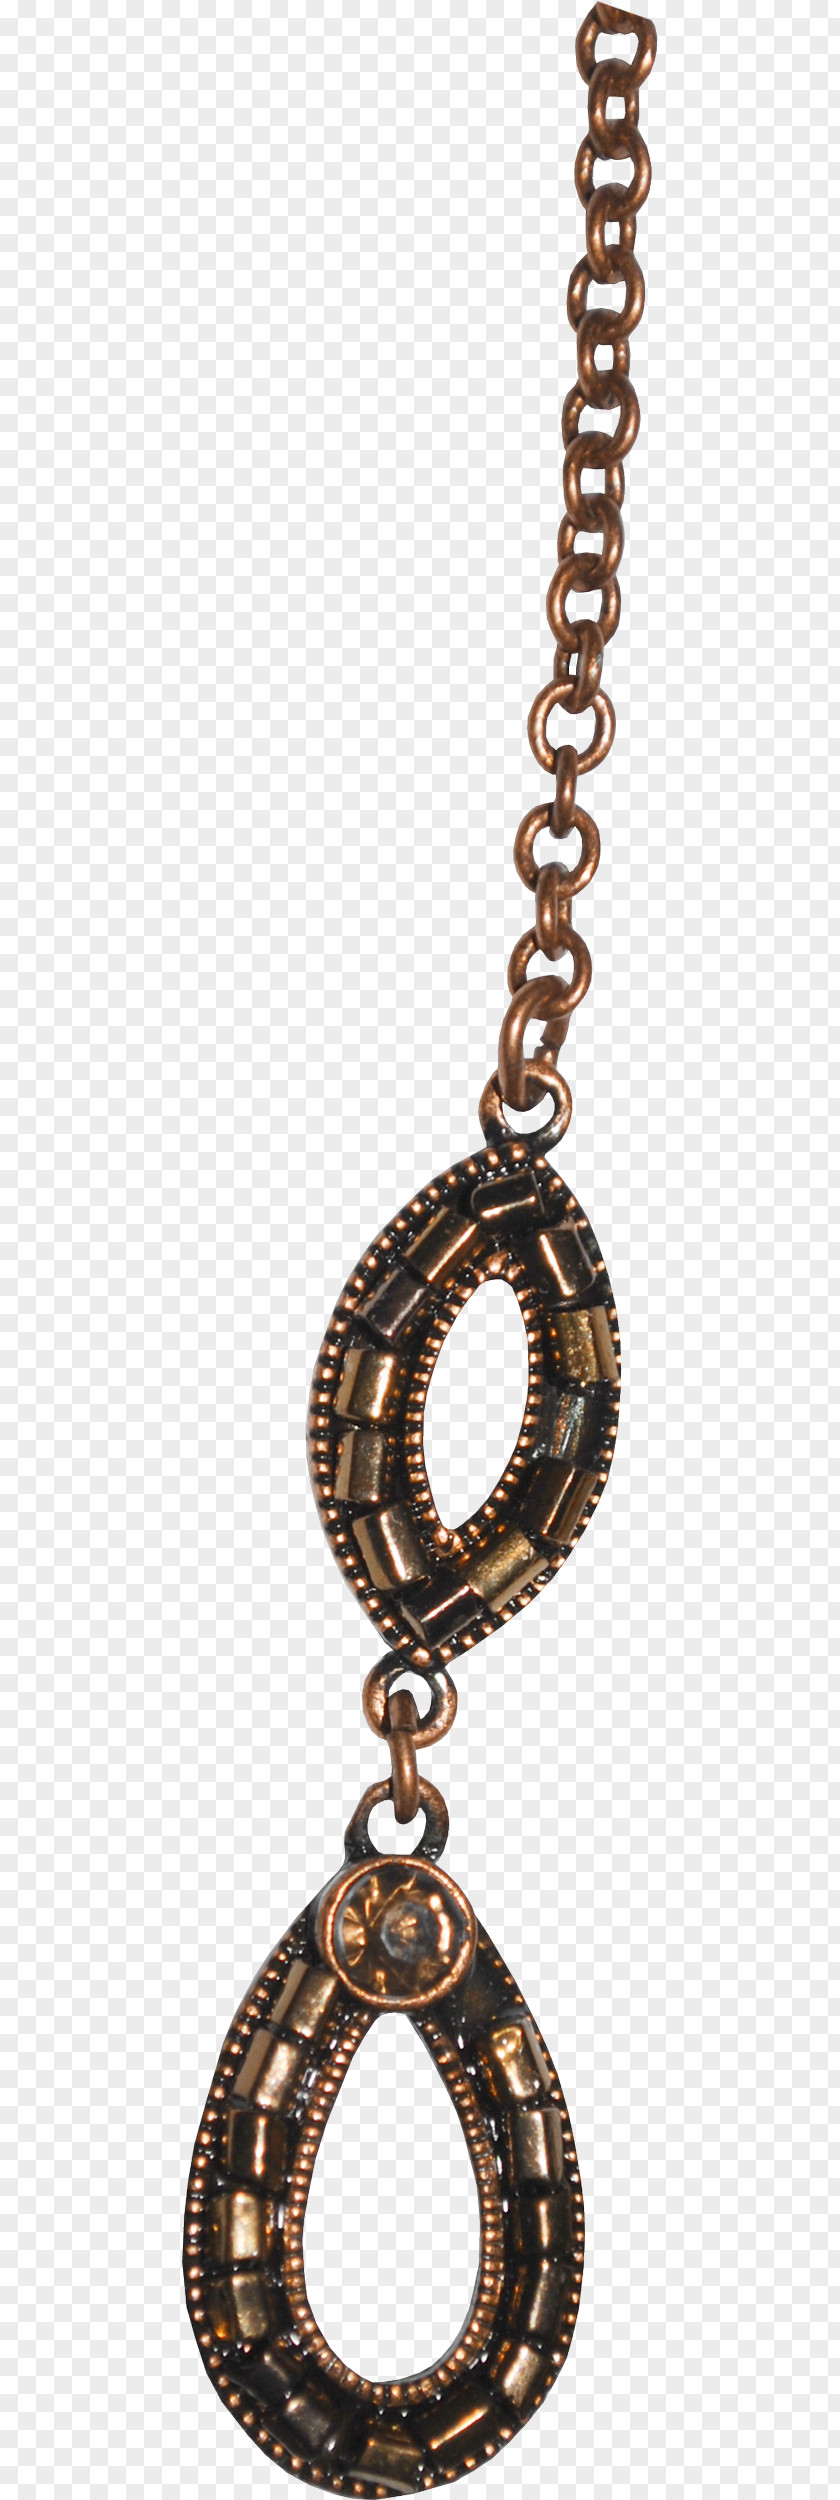 Metal Necklace Background PNG